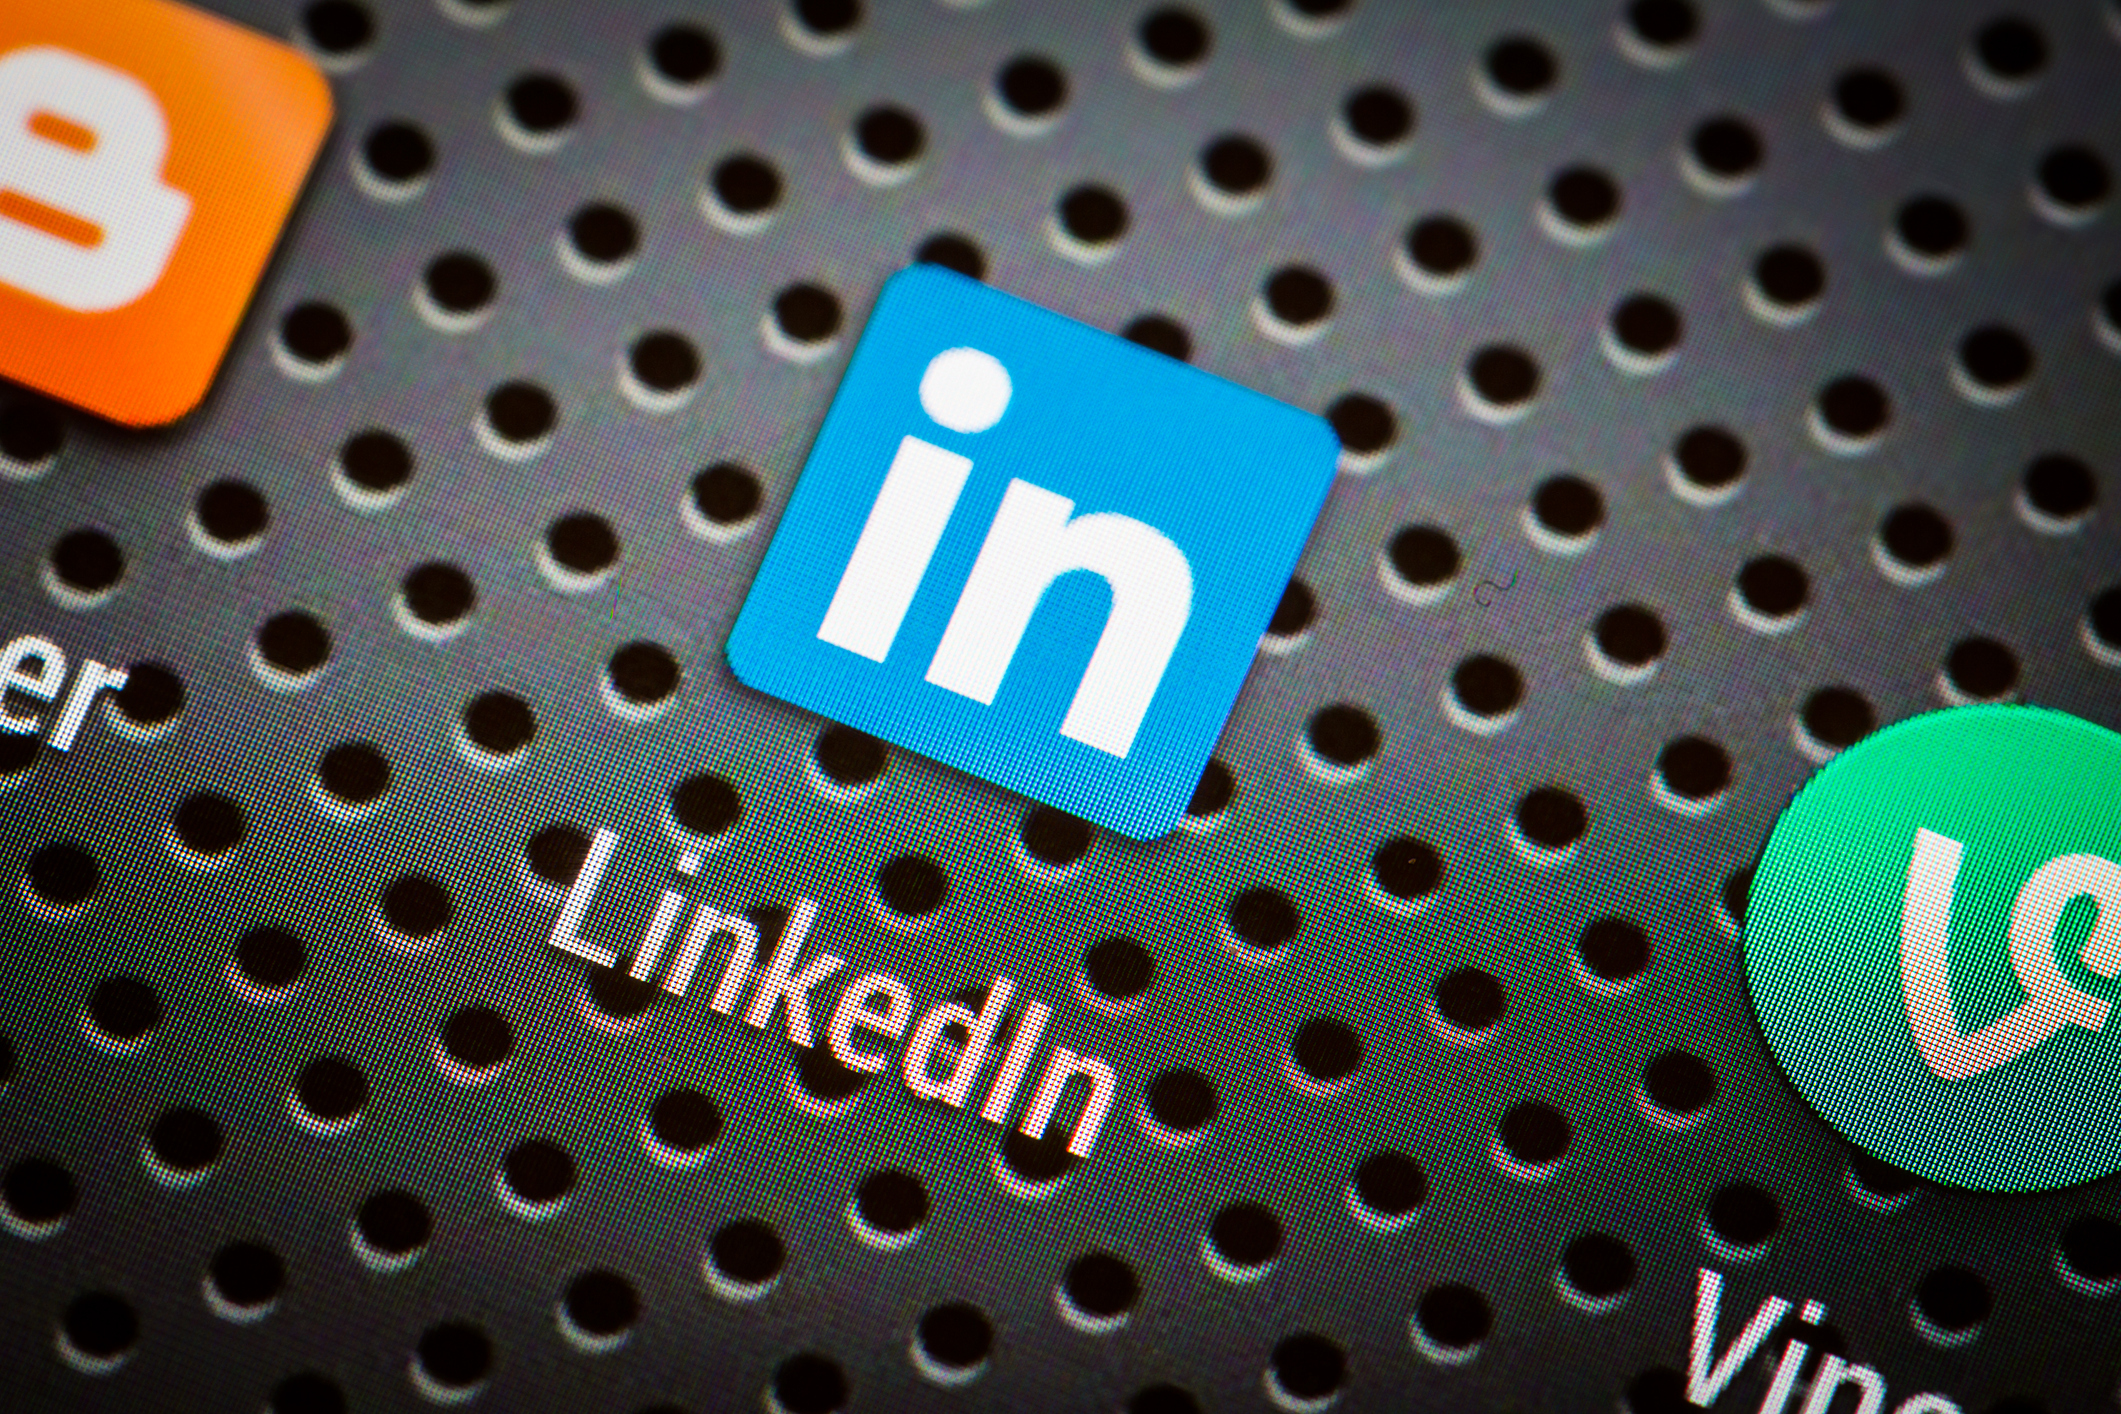 Social Media 101: What’s New with LinkedIn?